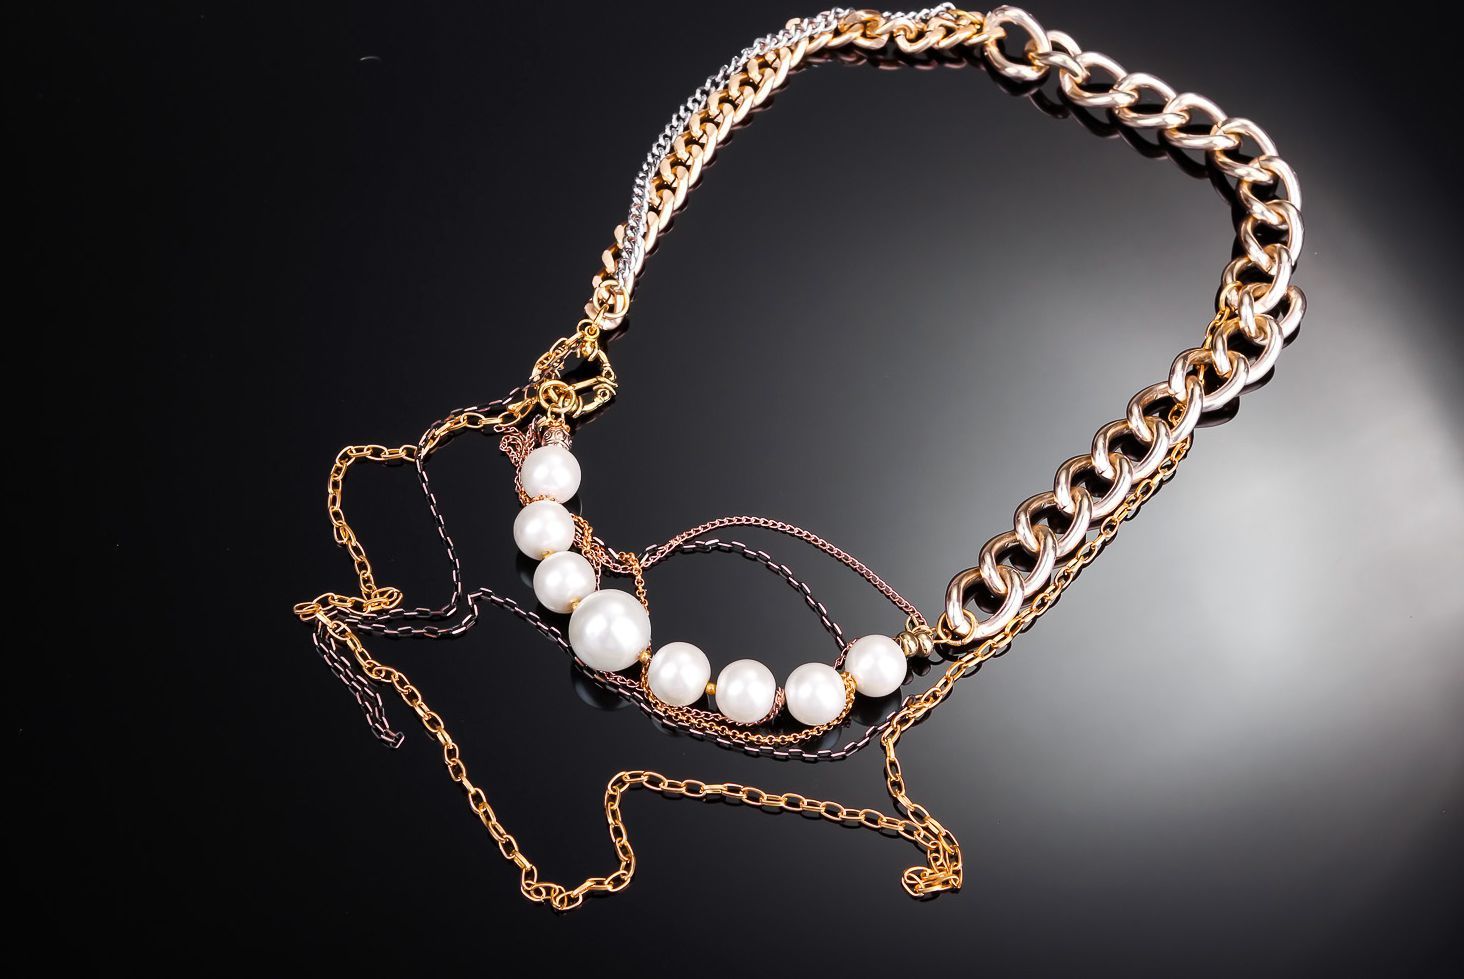 Necklace with ceramic pearls, handmade photo 2